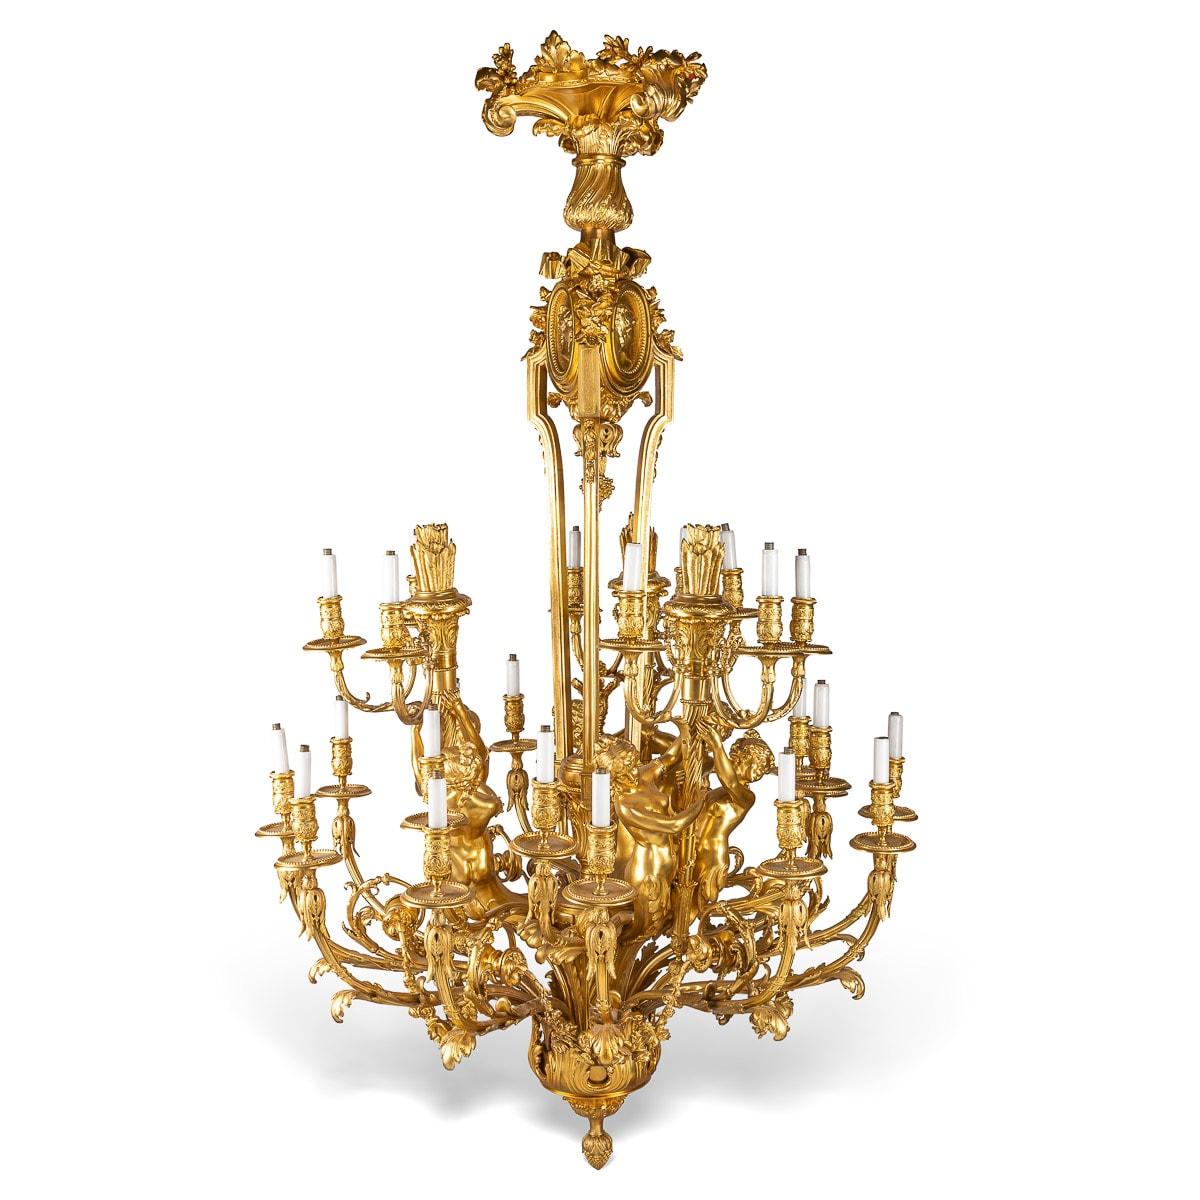 Antique late-19th century French palatial ormolu bronze twenty-seven light chandelier by the renowned designer and bronzier Maison Mottheau et Fils. This chandelier is in superb condition, the foliate and swag adorned branch arms held by six nude